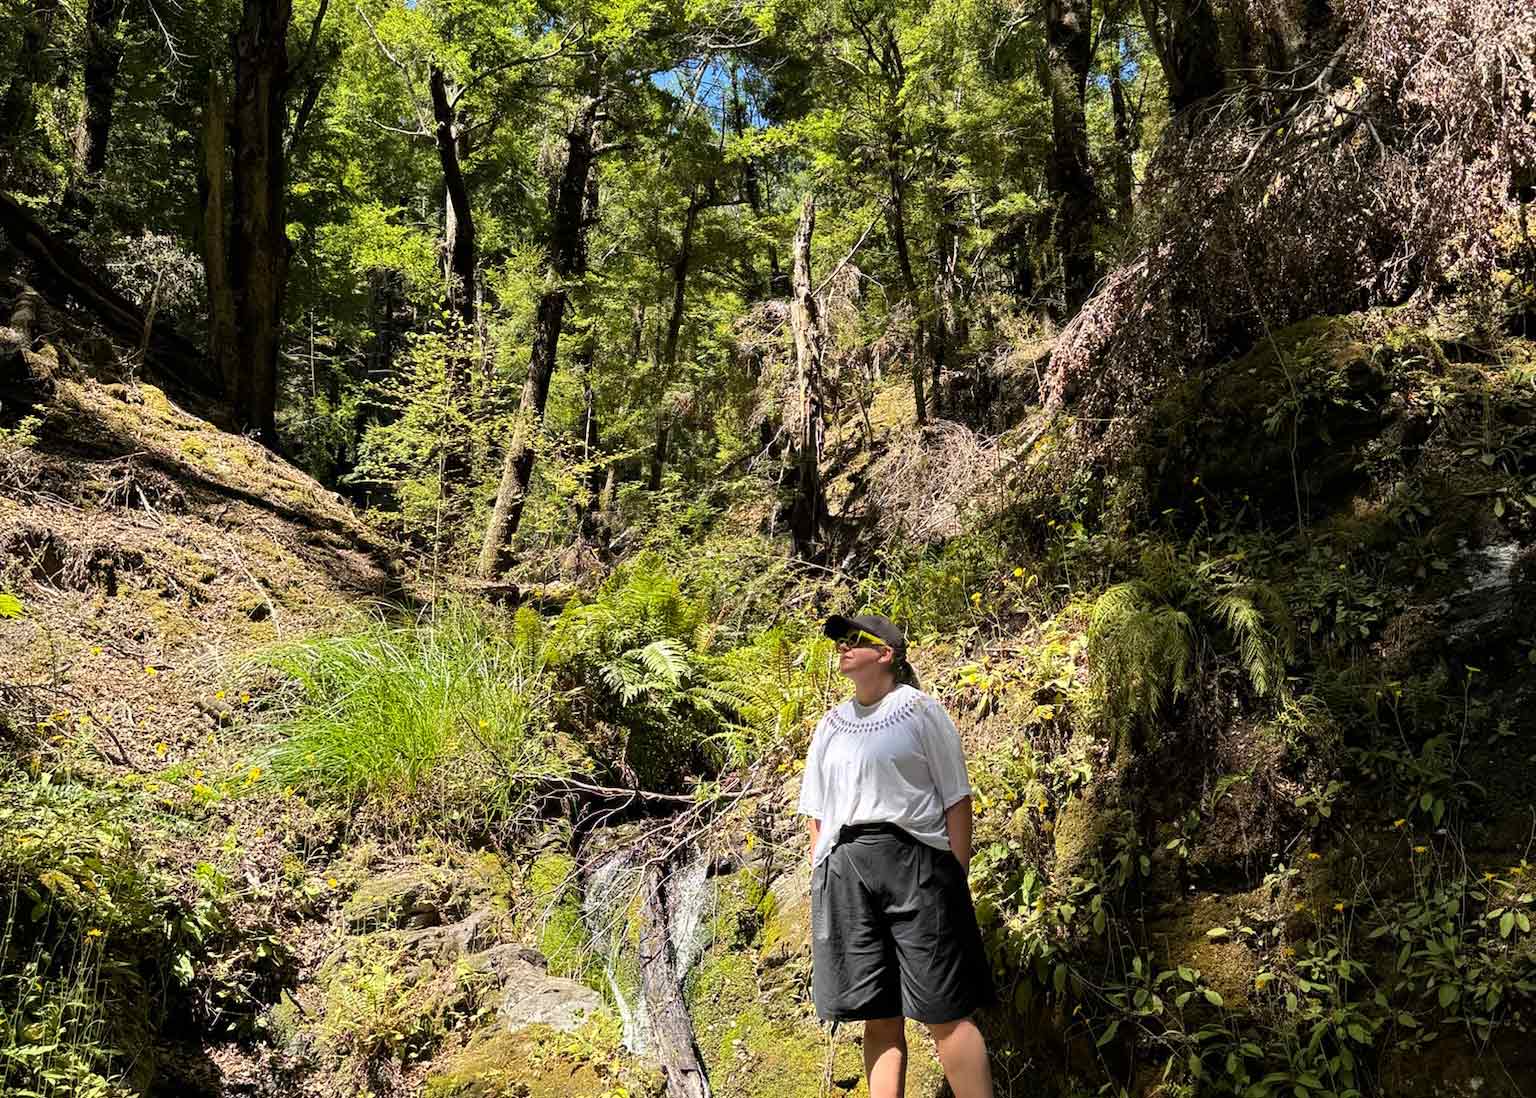 Asmuss designer and cofounder Clare standing beside a rocky stream surrounded by beech forest on the Fernburn track near Wanaka New Zealand